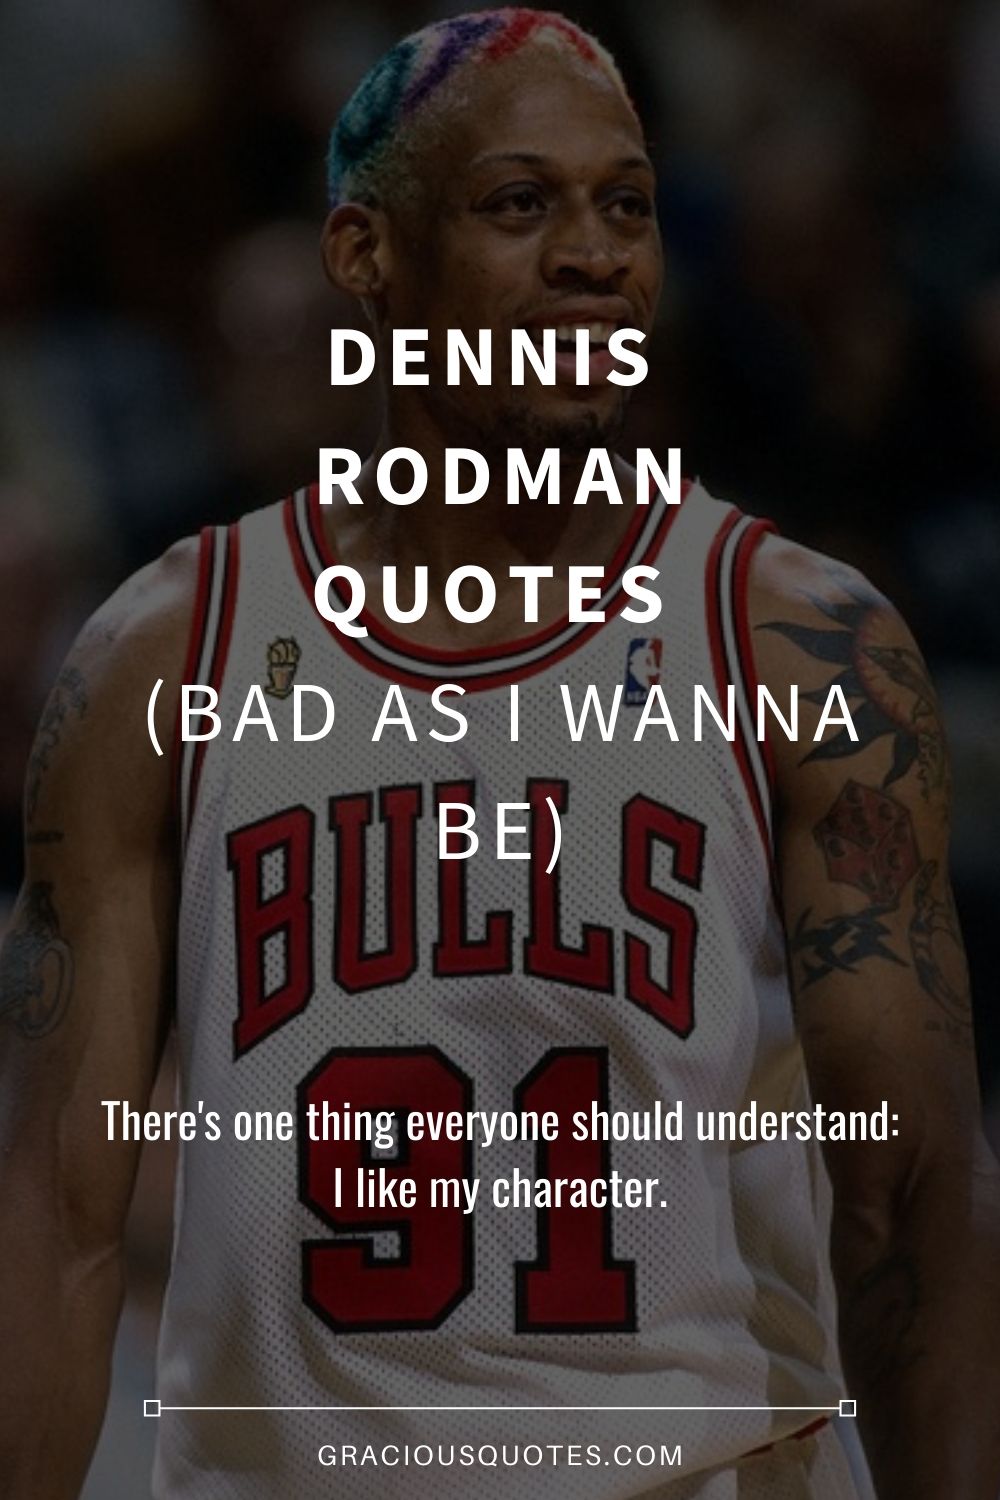 Dennis Rodman Quotes (BAD AS I WANNA BE) - Gracious Quotes